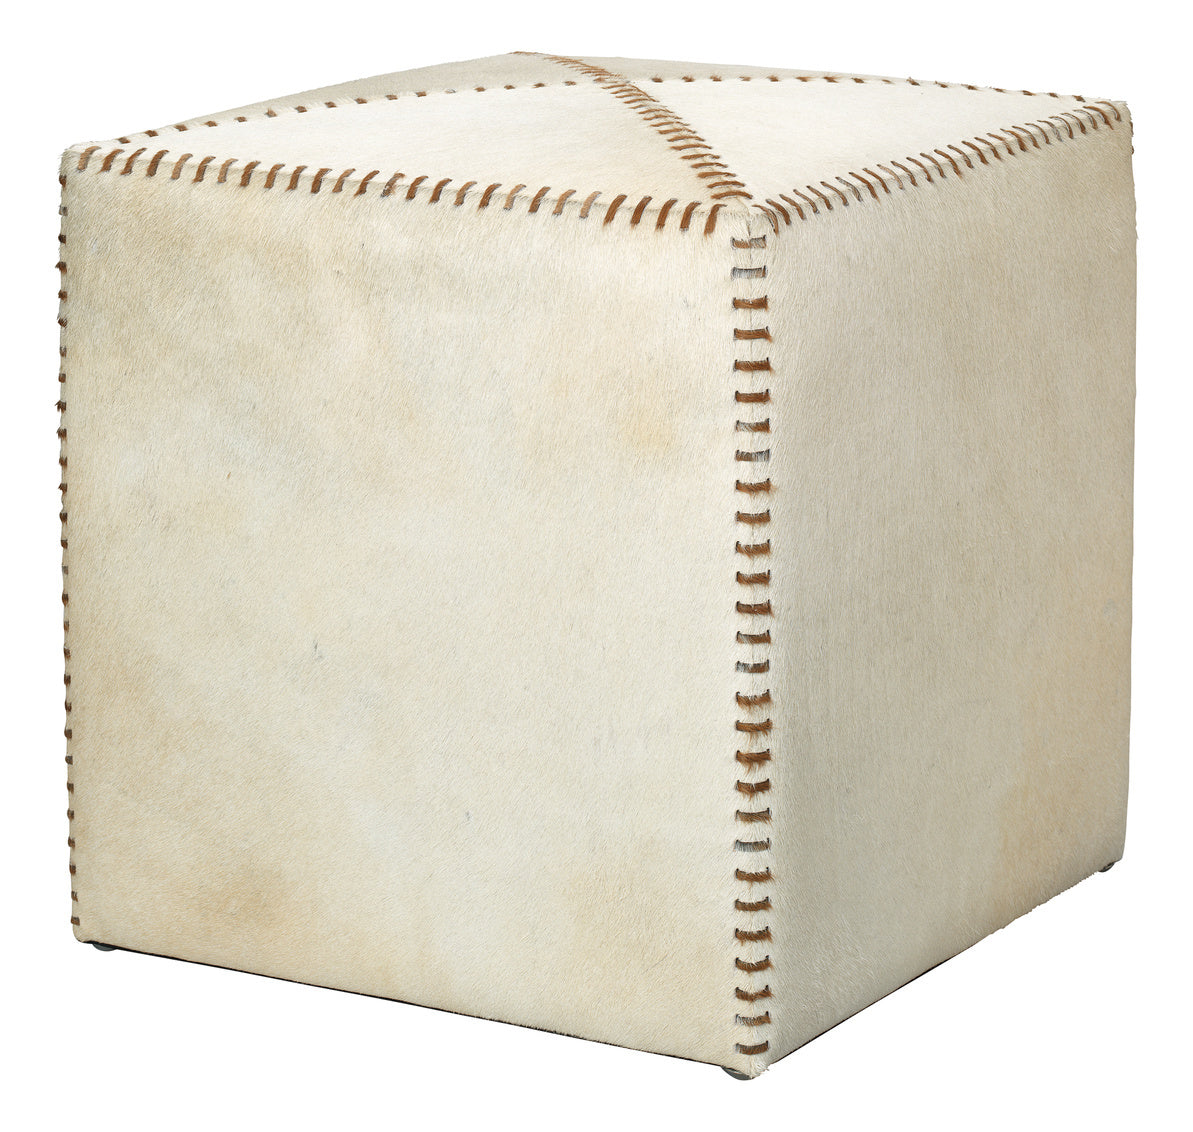 jamie young small ottoman white hide